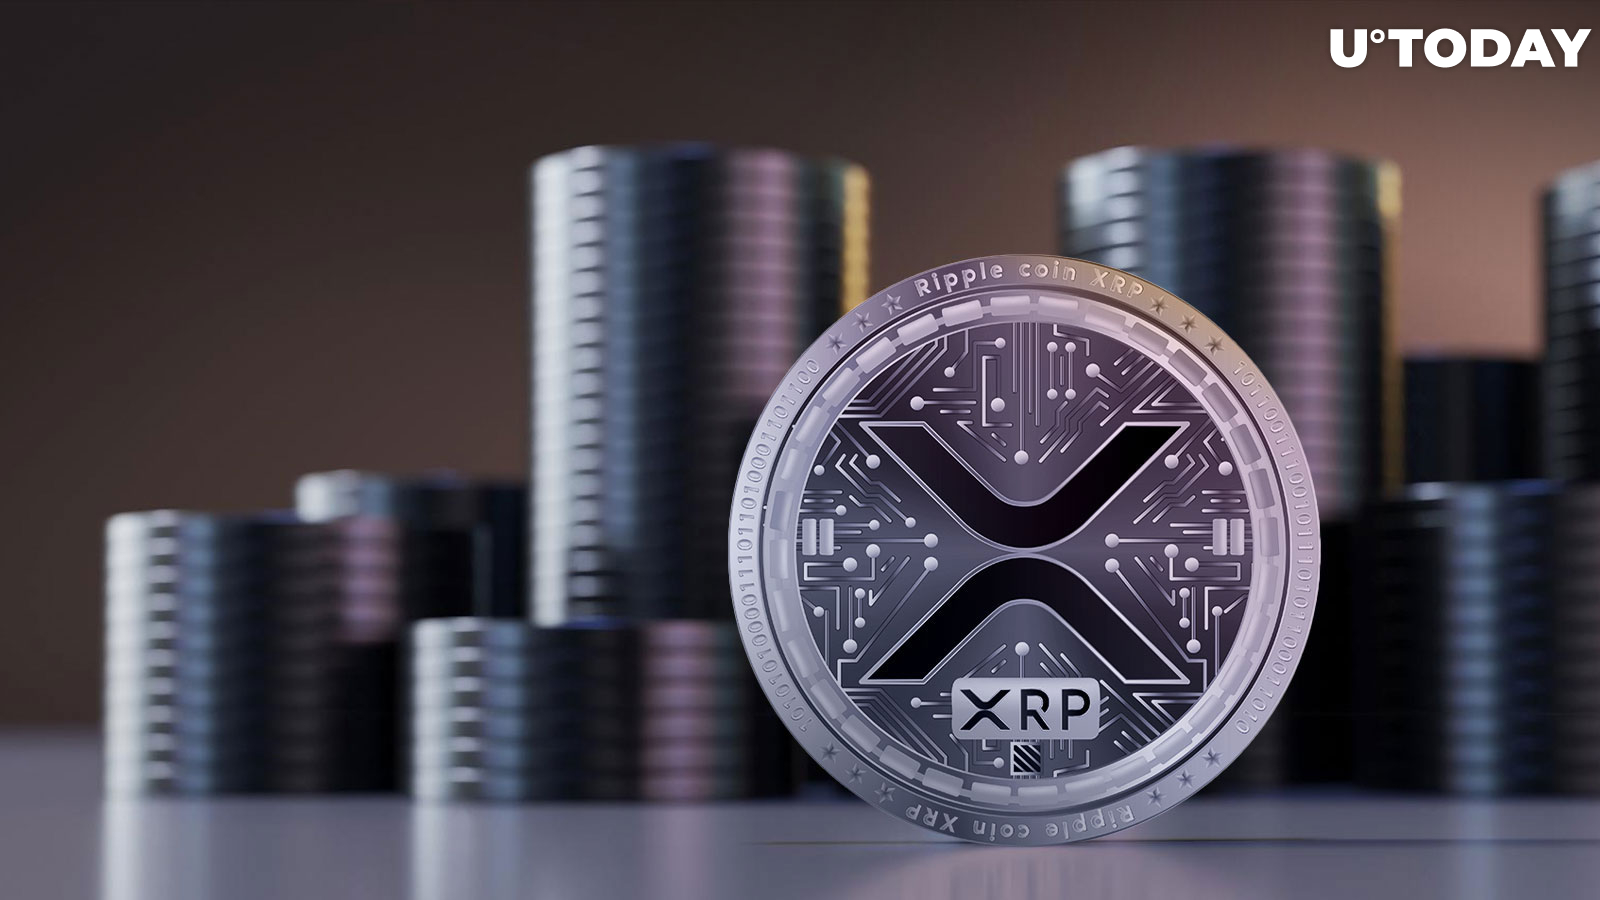 XRP Ledger Booms With 40% Spike in Accounts as XRP Price Holds Crucial Level